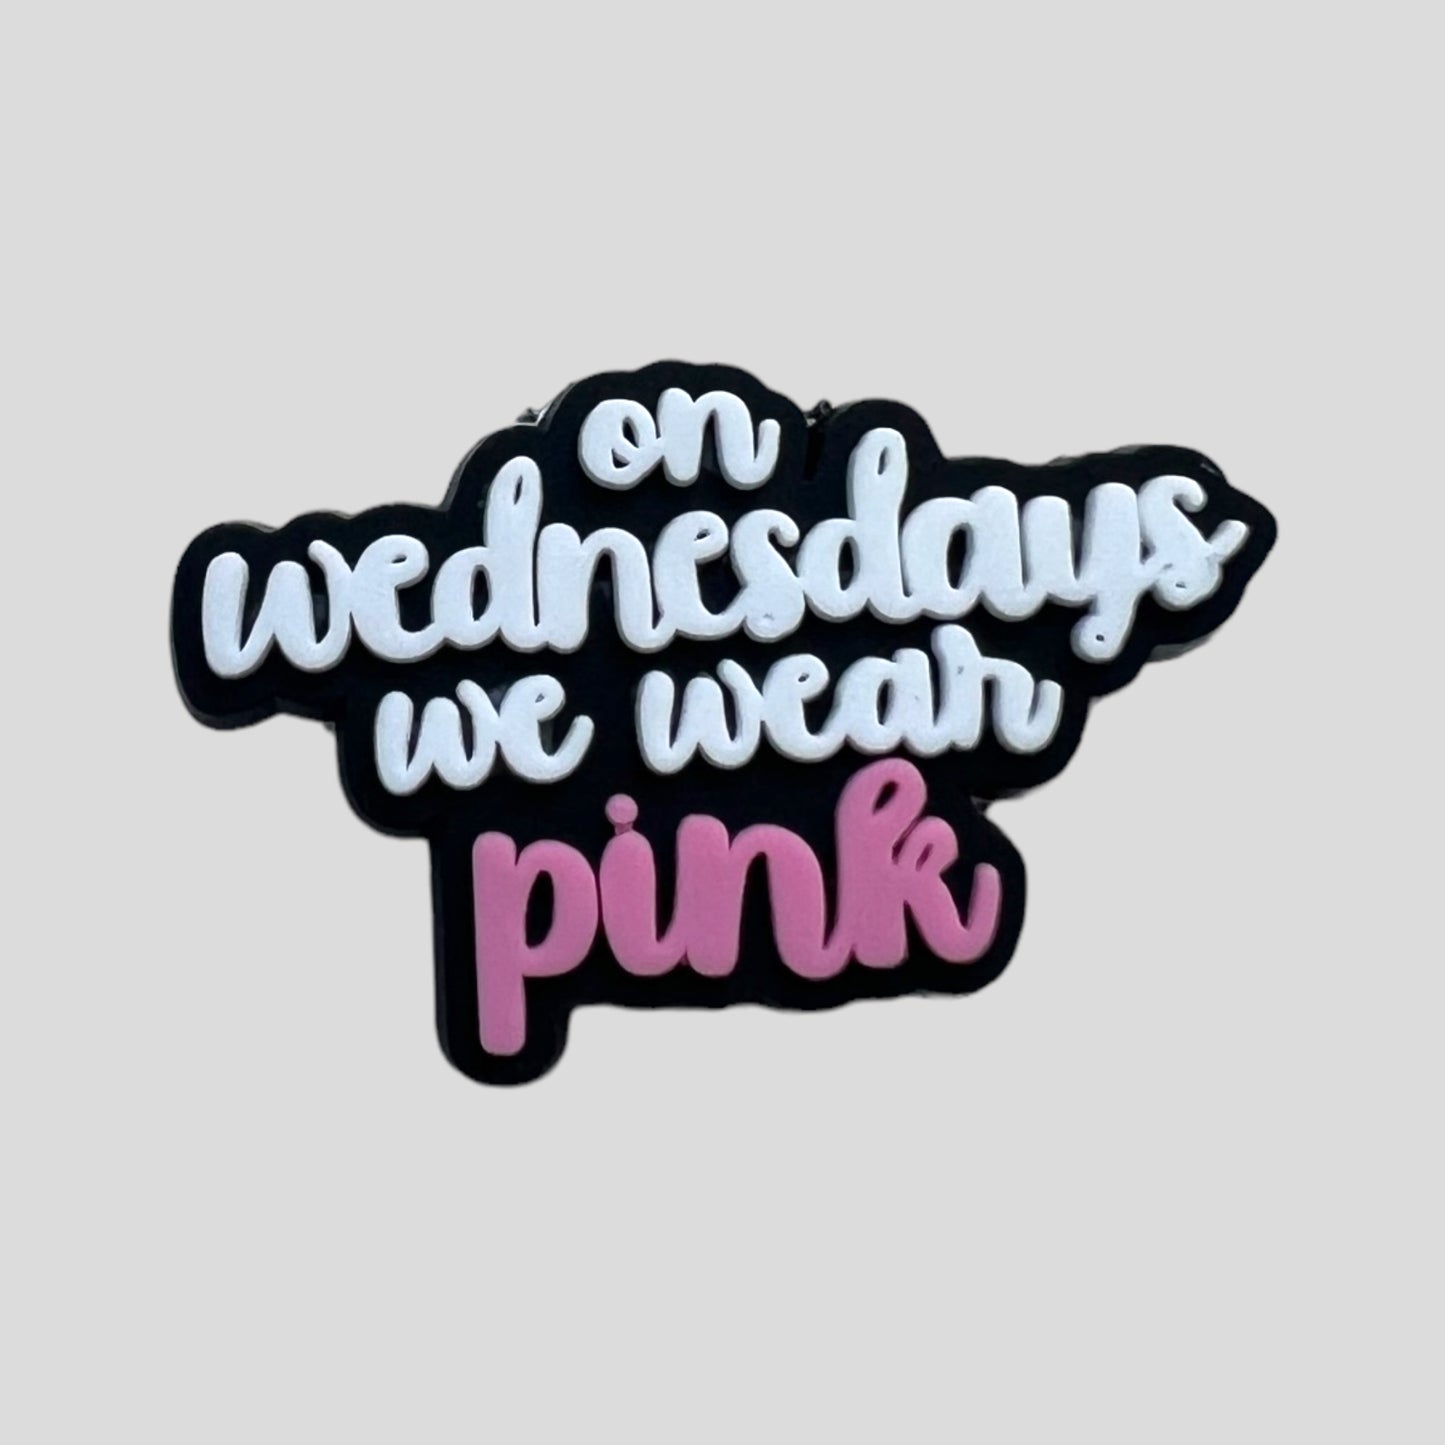 On Wednesdays We Wear Pink | Quotes